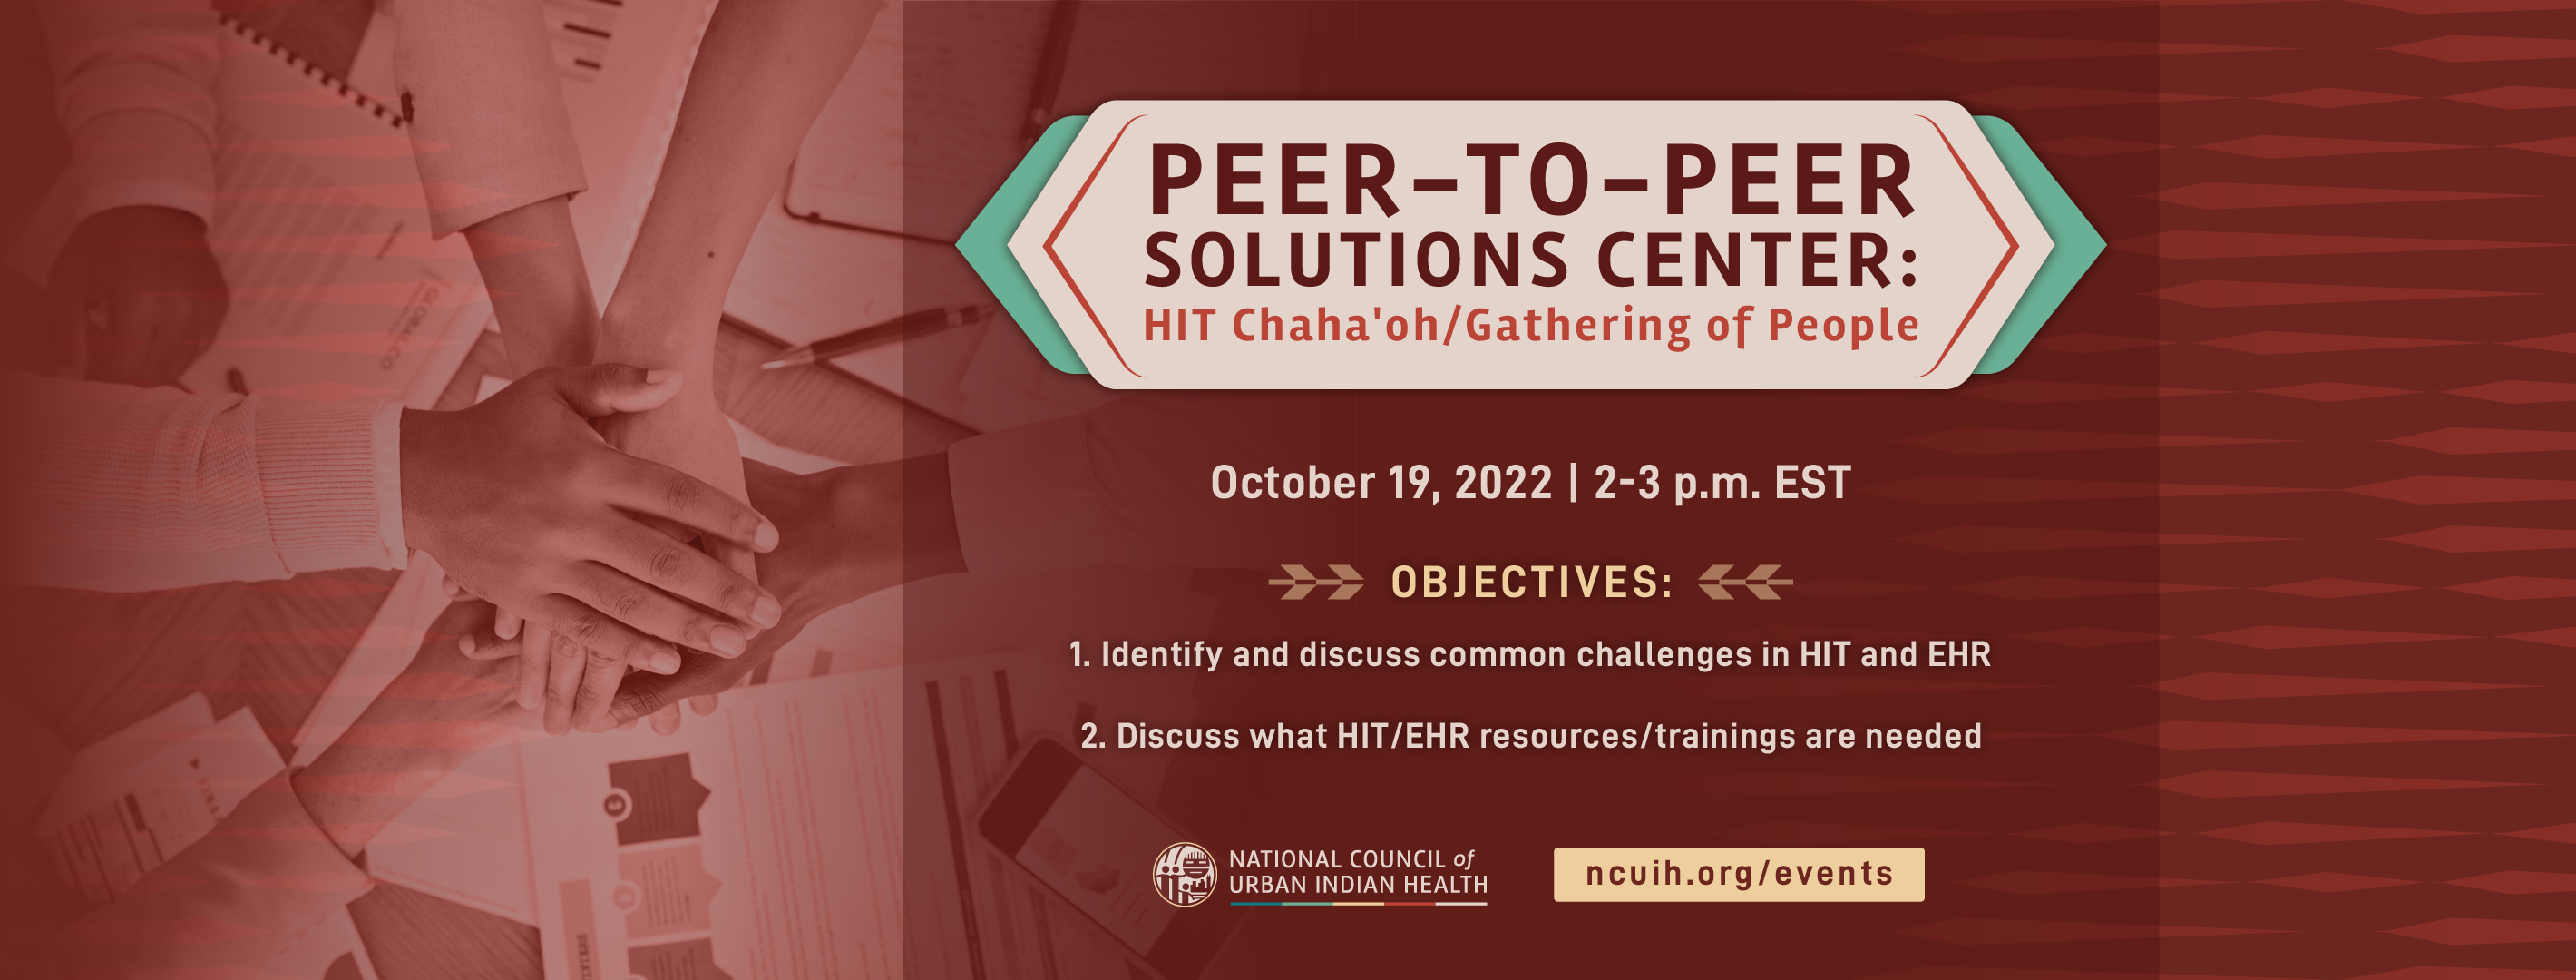 Peer-to-Peer Solutions Center: HIT Chaha'oh/Gathering of People